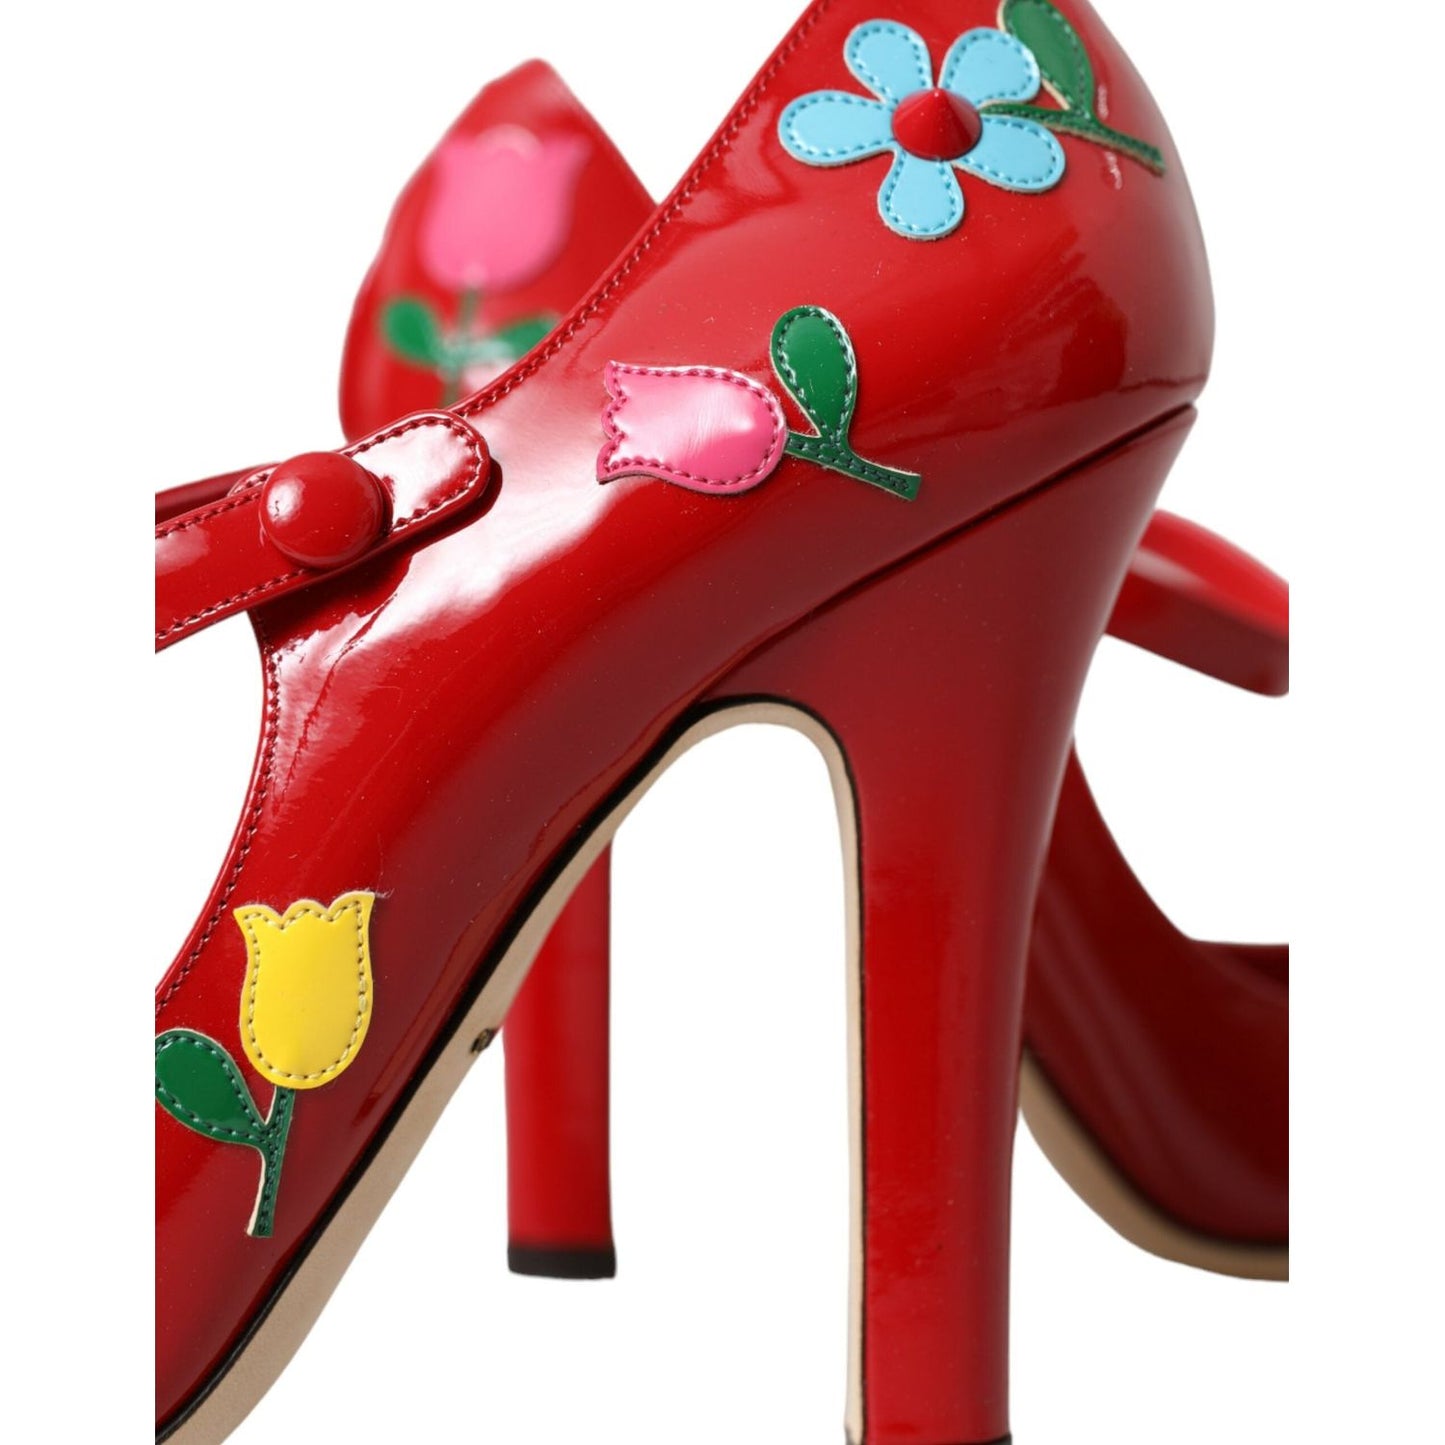 Dolce & Gabbana Red Leather Embellished Mary Jane Pumps Heels Shoes red-leather-embellished-mary-jane-pumps-heels-shoes